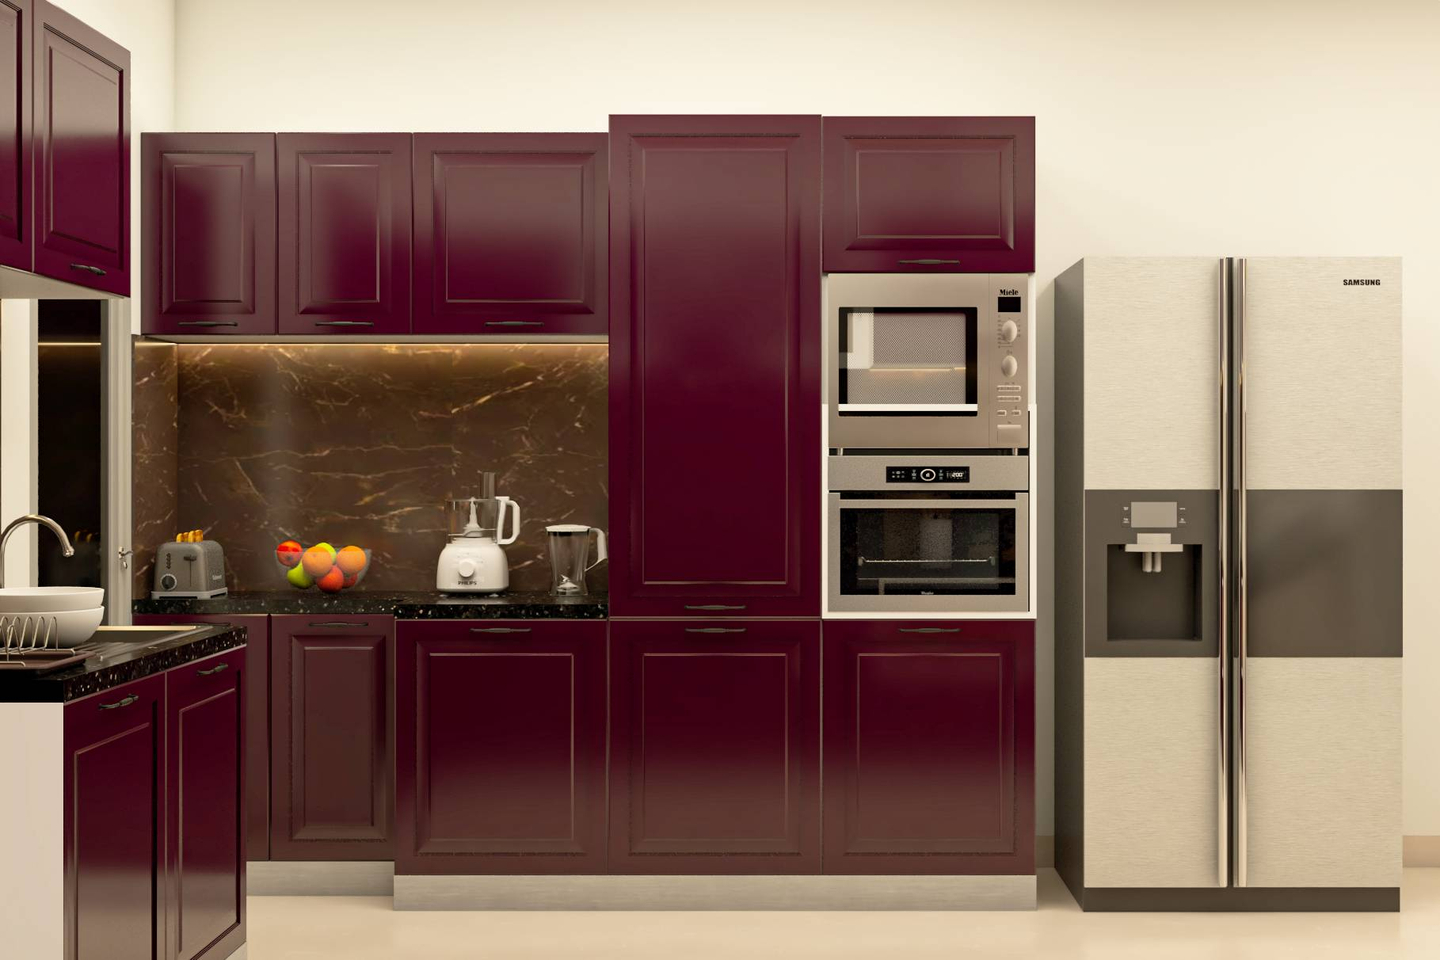 Contemporary L-Shaped Modular Kitchen Cabinet Design In Maroon